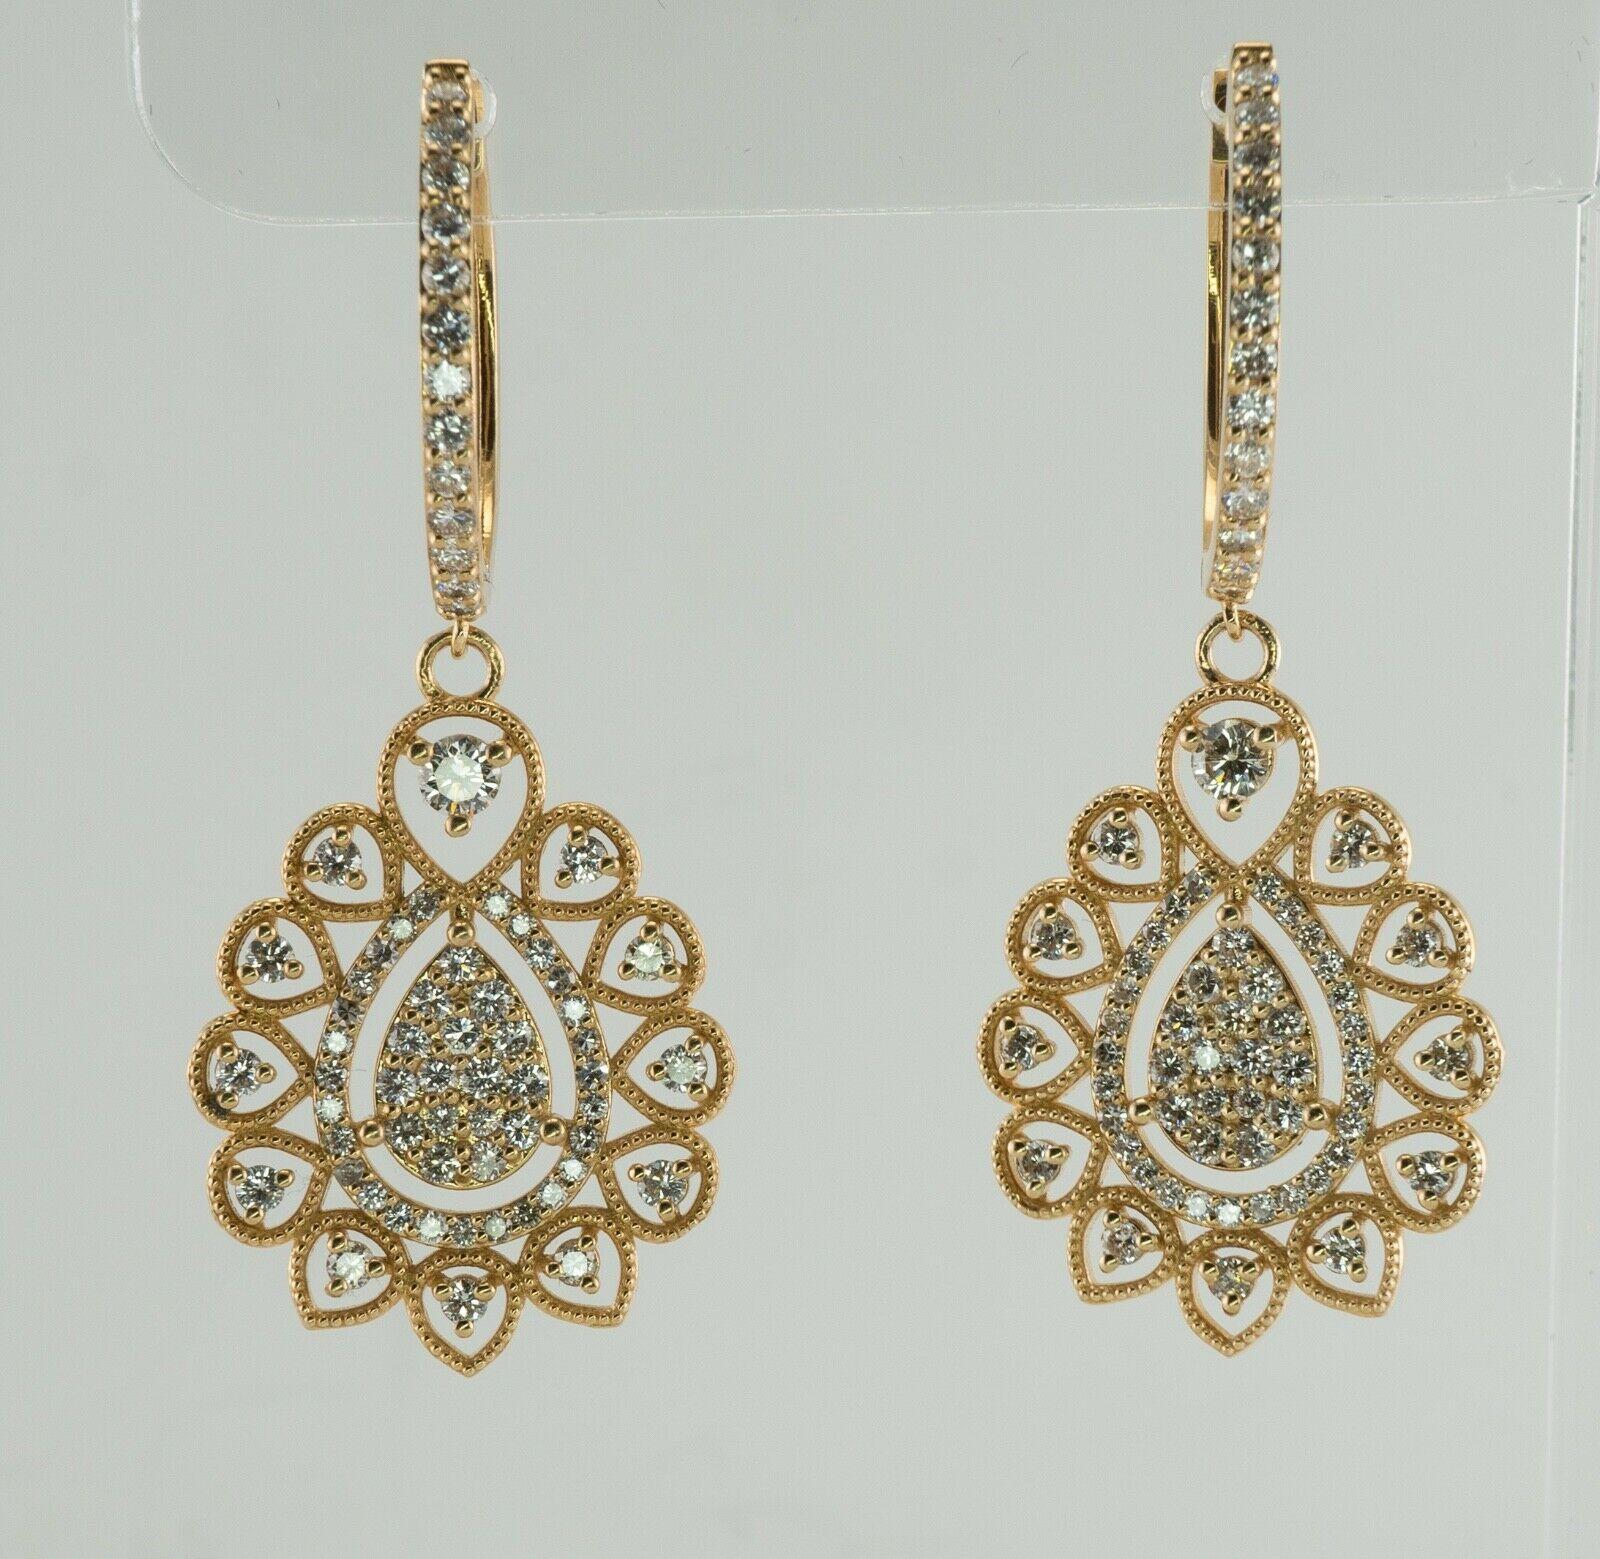 These estate earrings are crafted in solid 14K Yellow Gold (carefully tested and guaranteed).
The gorgeous millgrained dangle part of the earring holds 57 round diamonds plus 11 diamonds on the top.
The total diamond weight for the pair is 2.08